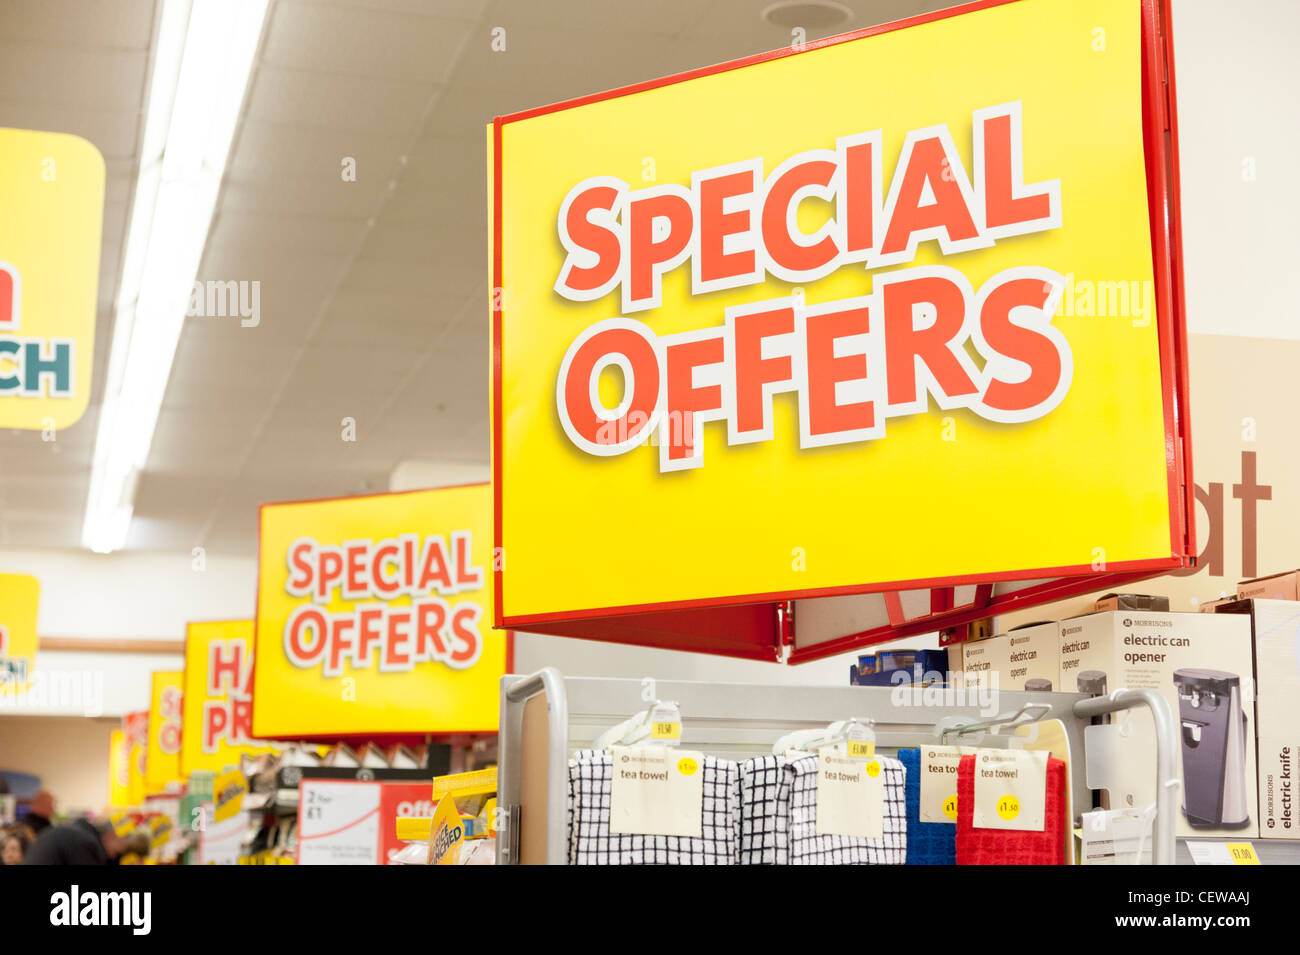 Special offers signs in Morrisons supermarket, England, UK Stock Photo